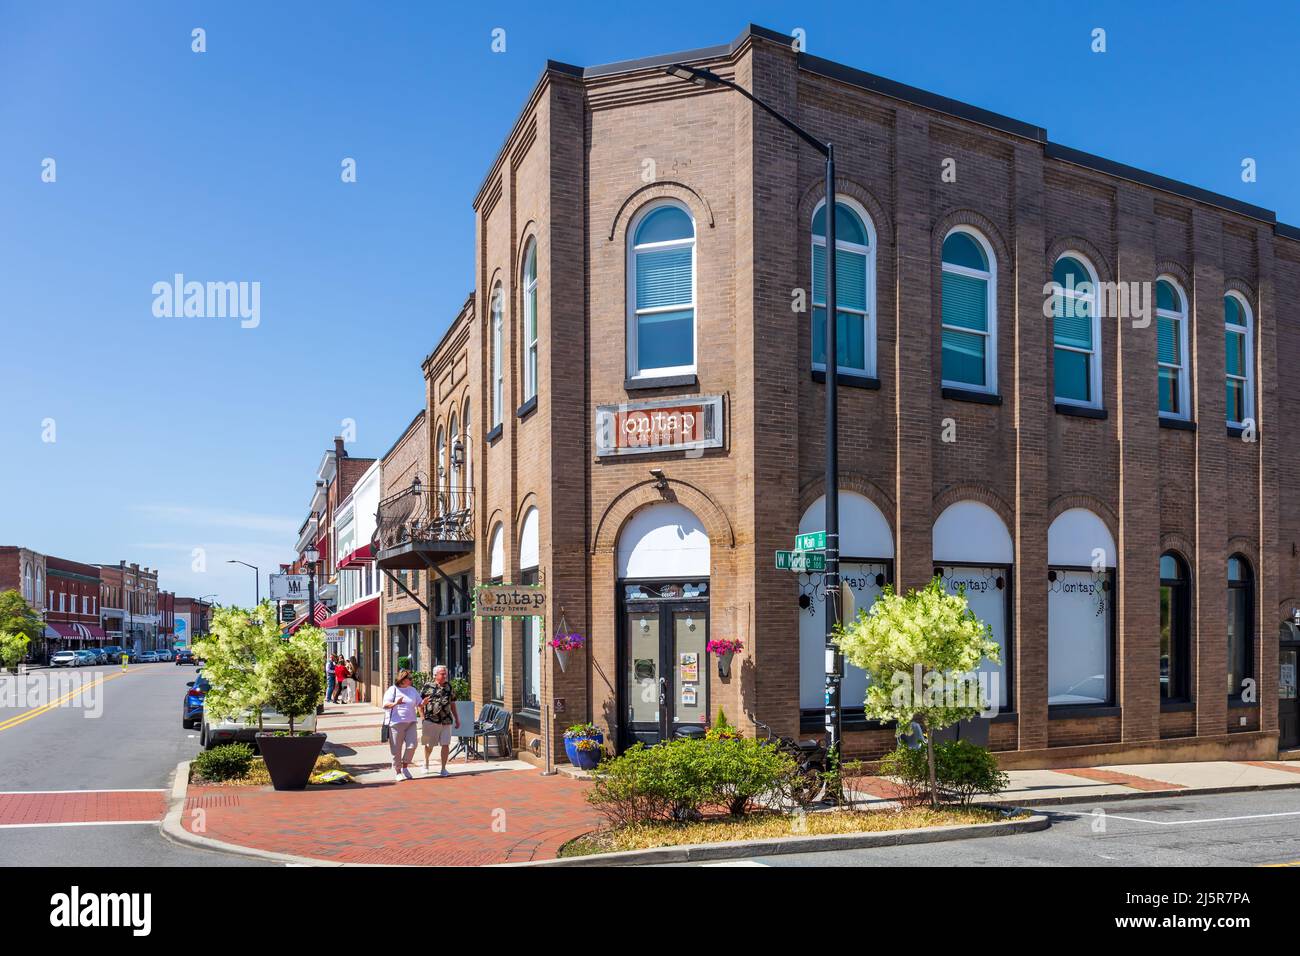 MOORESVILLE, NC, USA-17 APRIL 2022: Street view showing corner of Main Street and Moore Avenue, focus on 'On Tap Crafty Brews', with people on sidewal Stock Photo